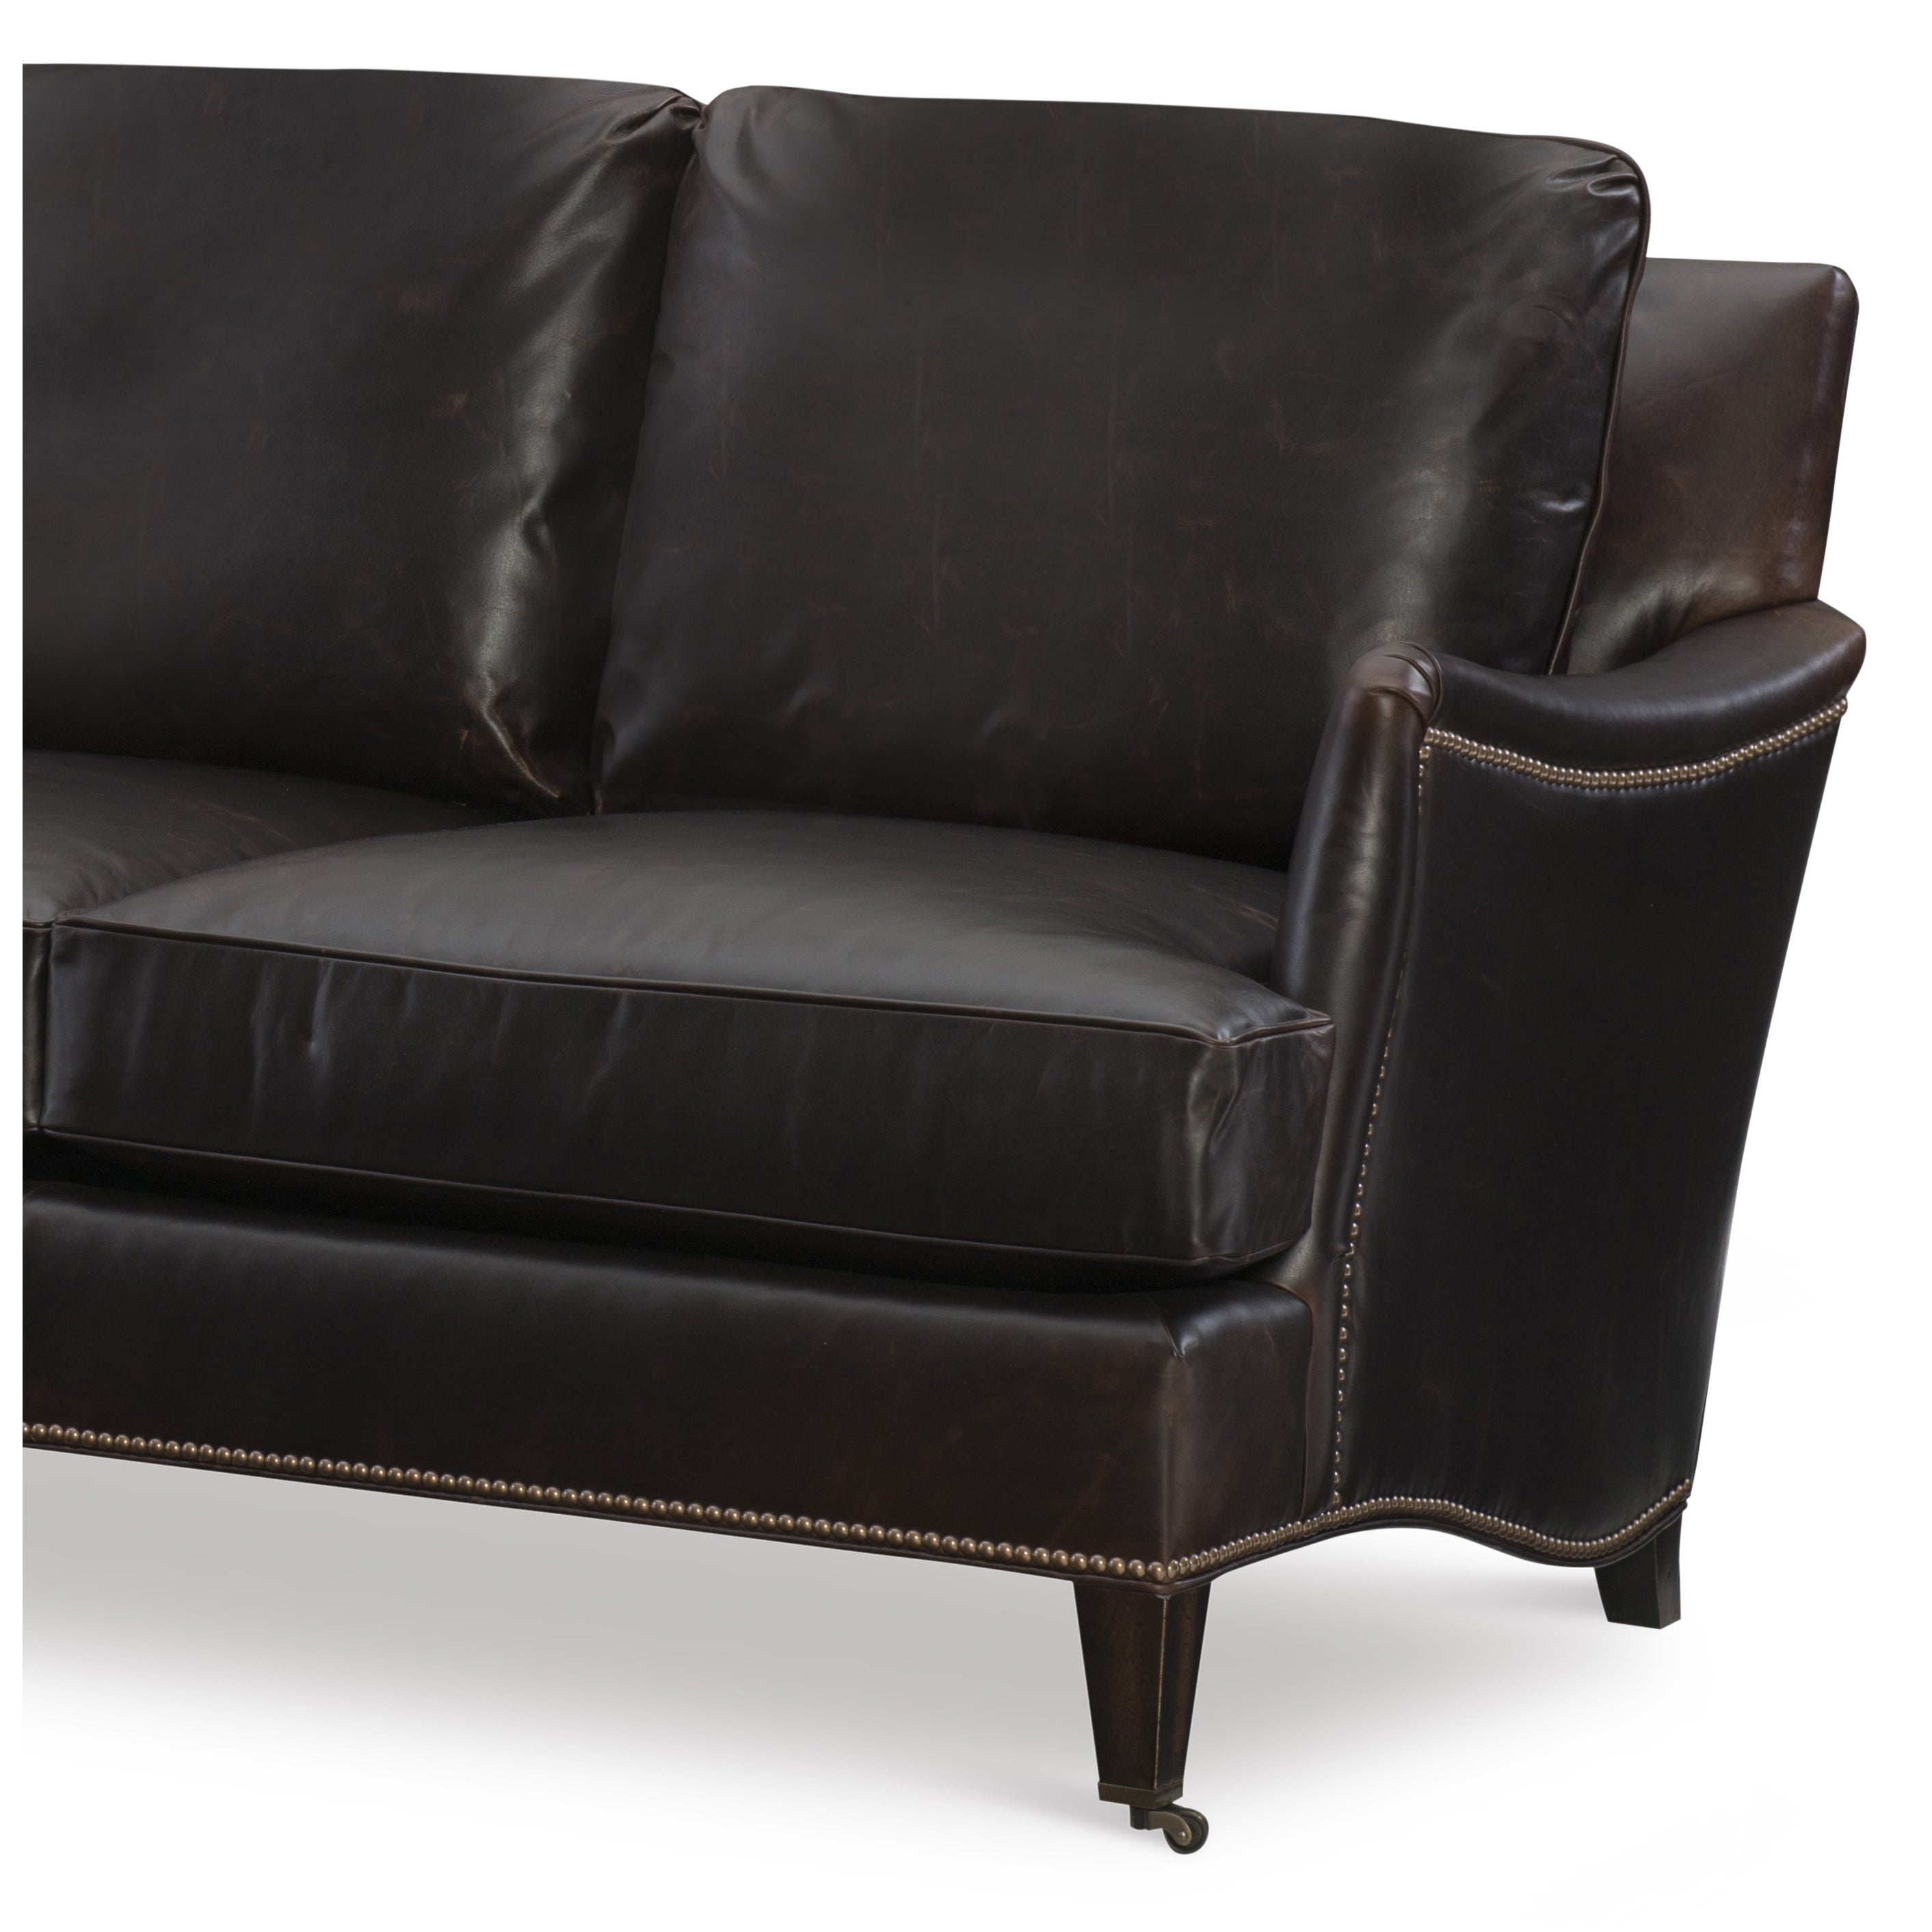 Thames Leather Sofa by Wesley Hall shown in Brompton Tobacco leather - close up